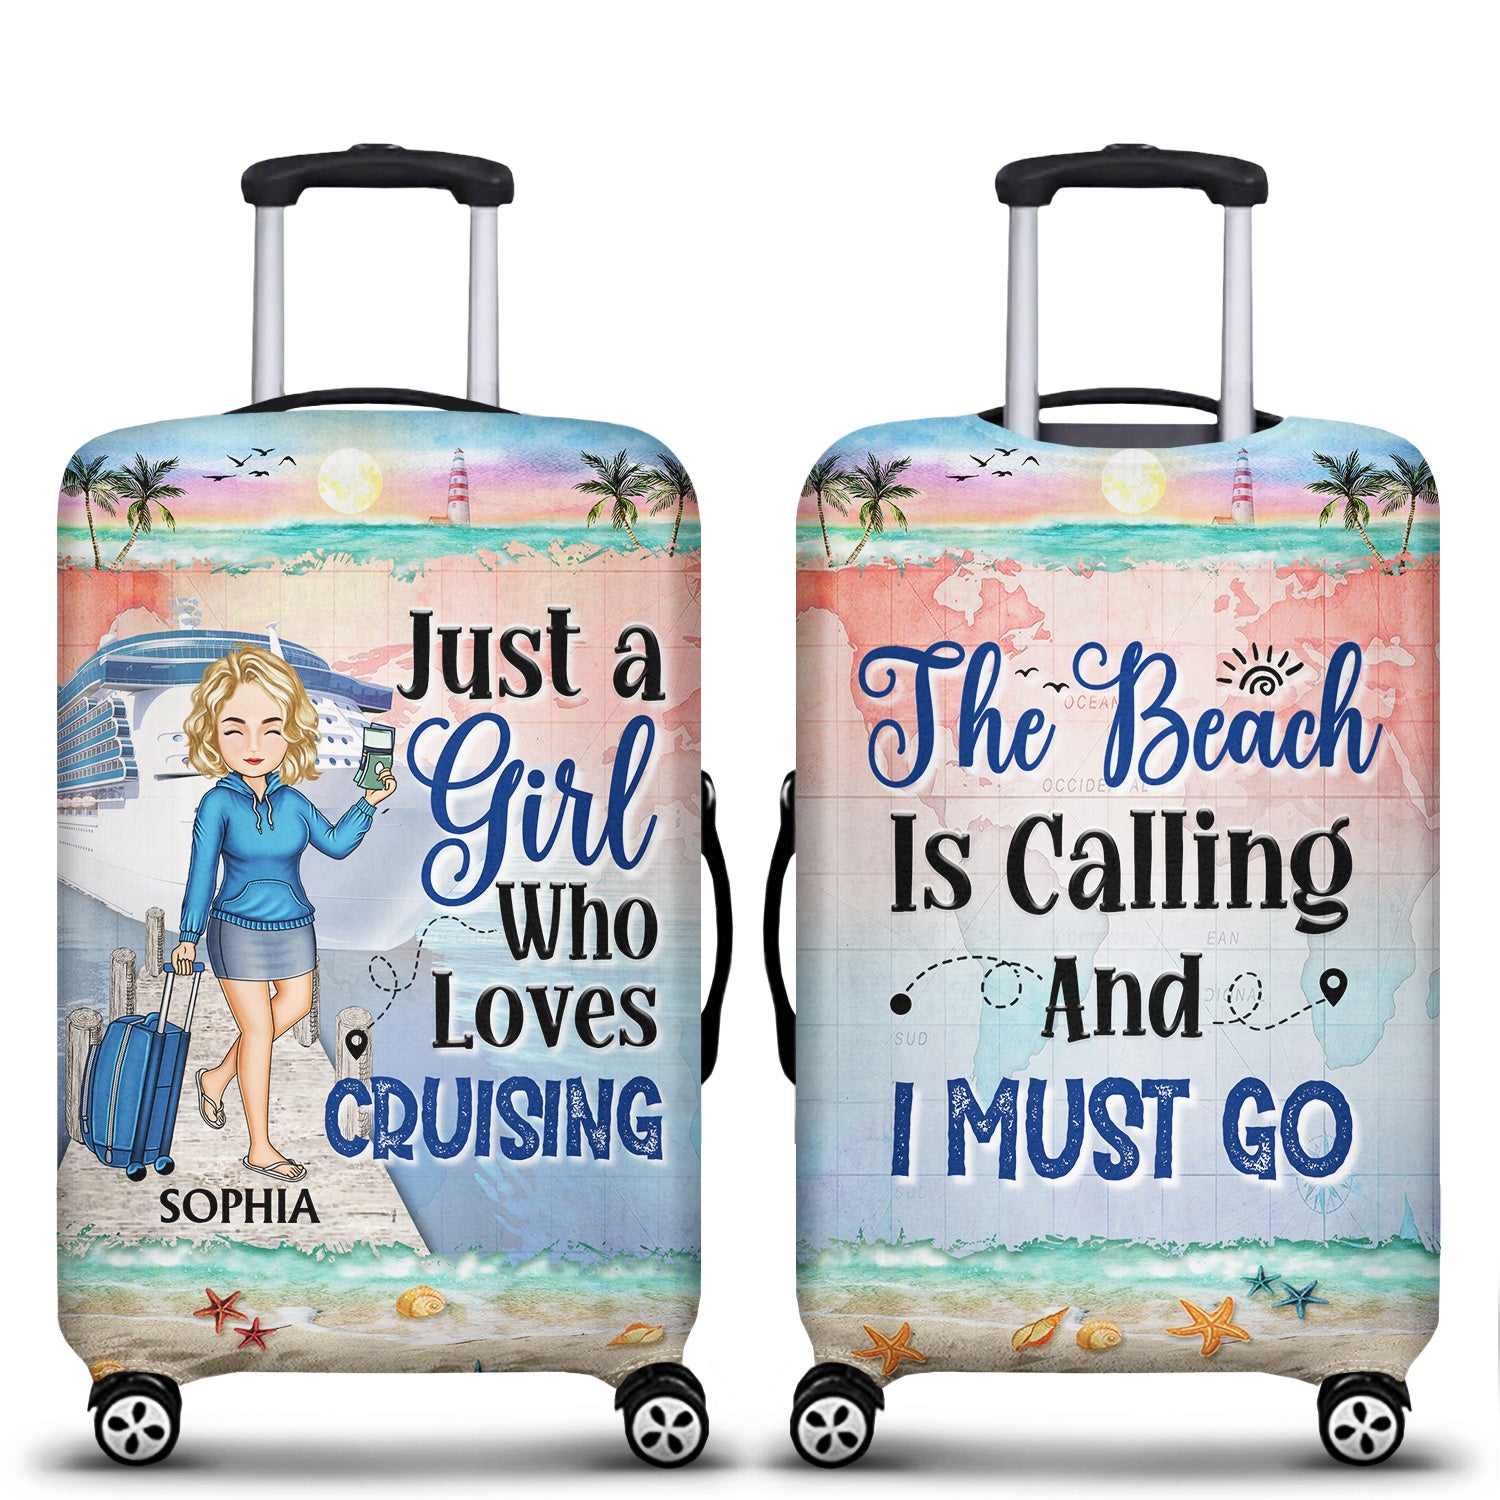 Just A Girl Boy Who Loves Cruising - Birthday Gift For Him, Her, Kid, Friends, Family, Trippin‘, Vacation, Beach, Sea, Travel Lovers - Personalized Custom Luggage Cover